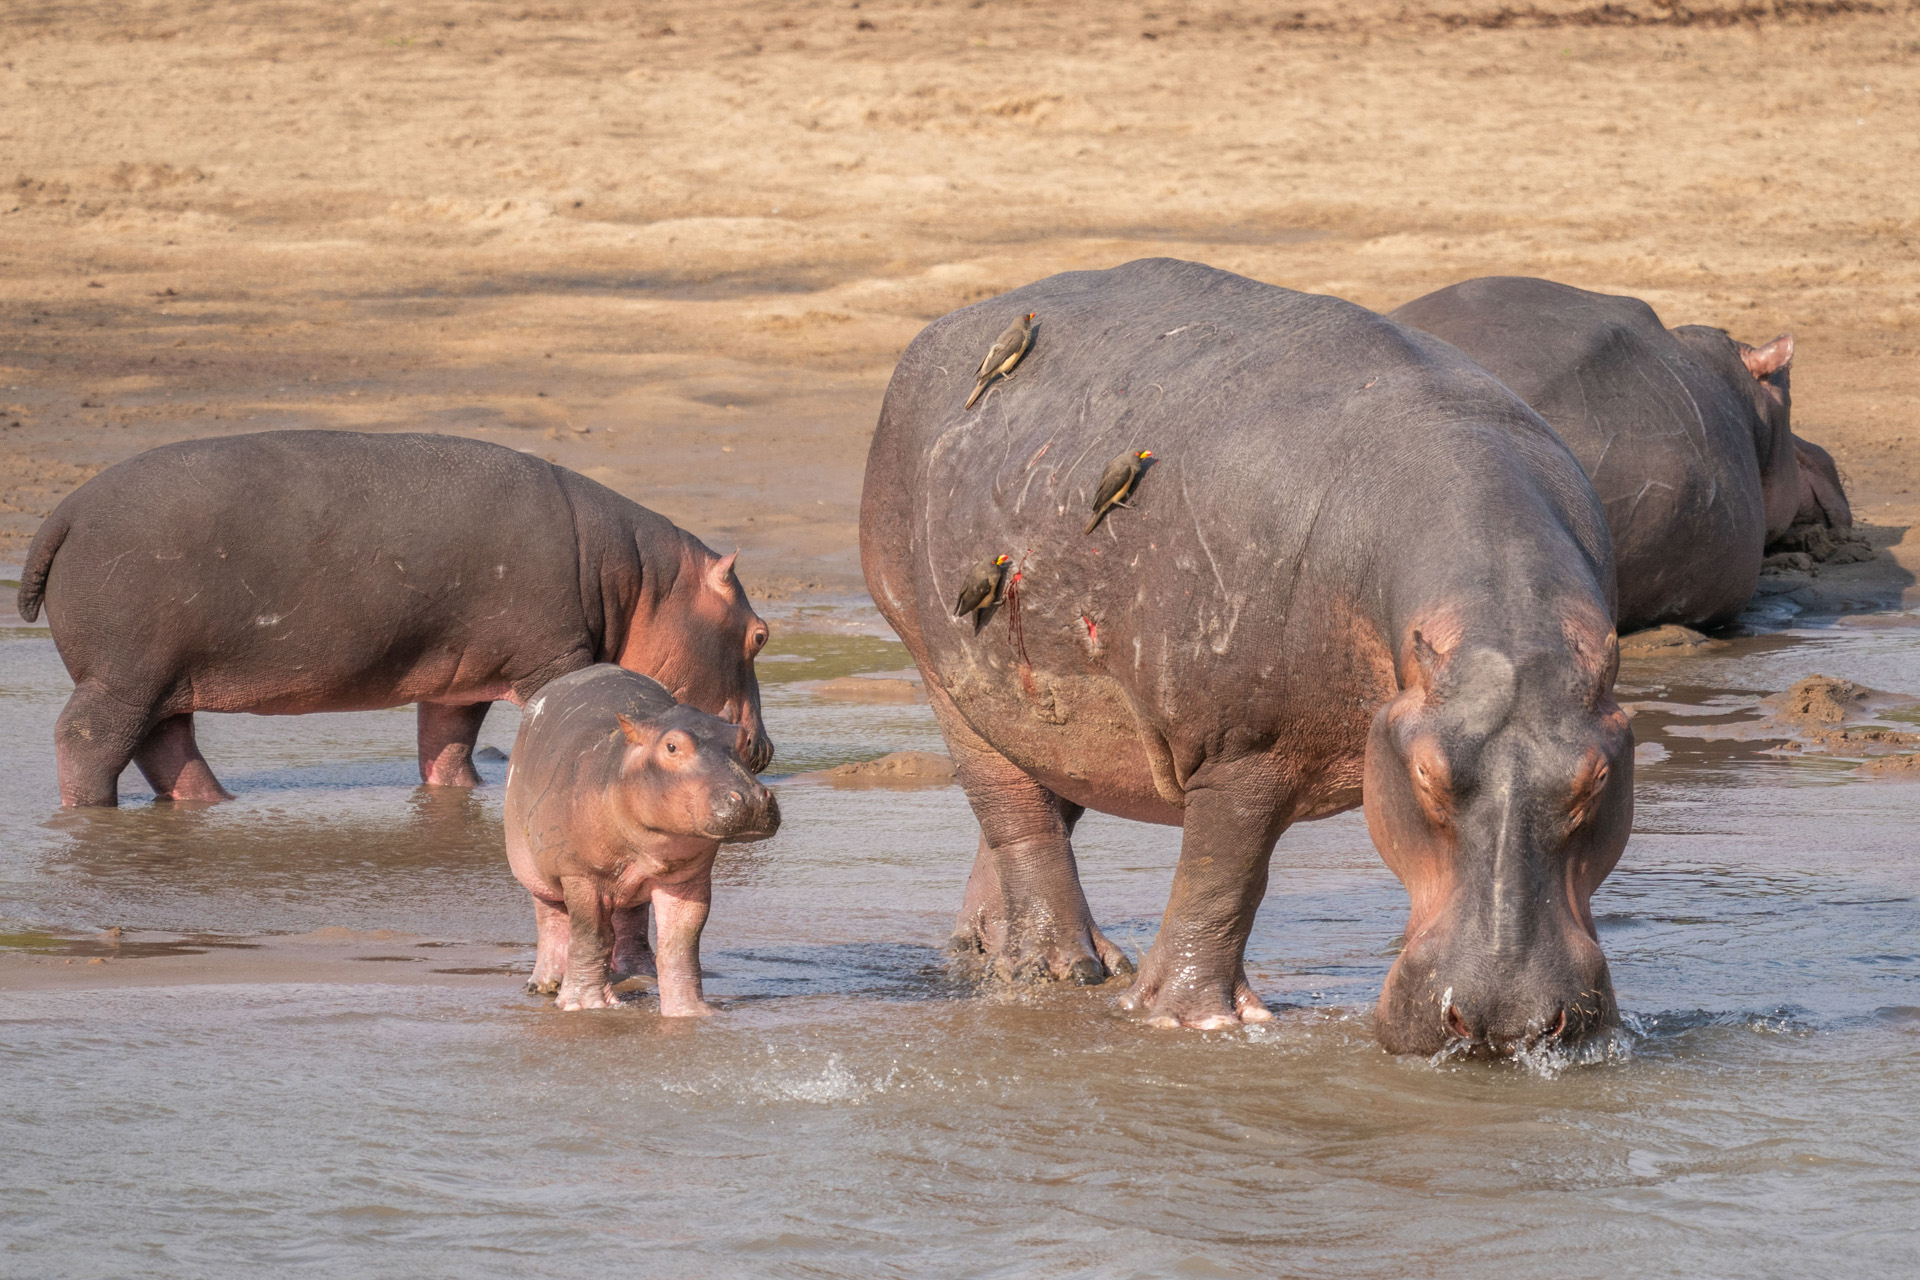 Hippos in the South Luangwa